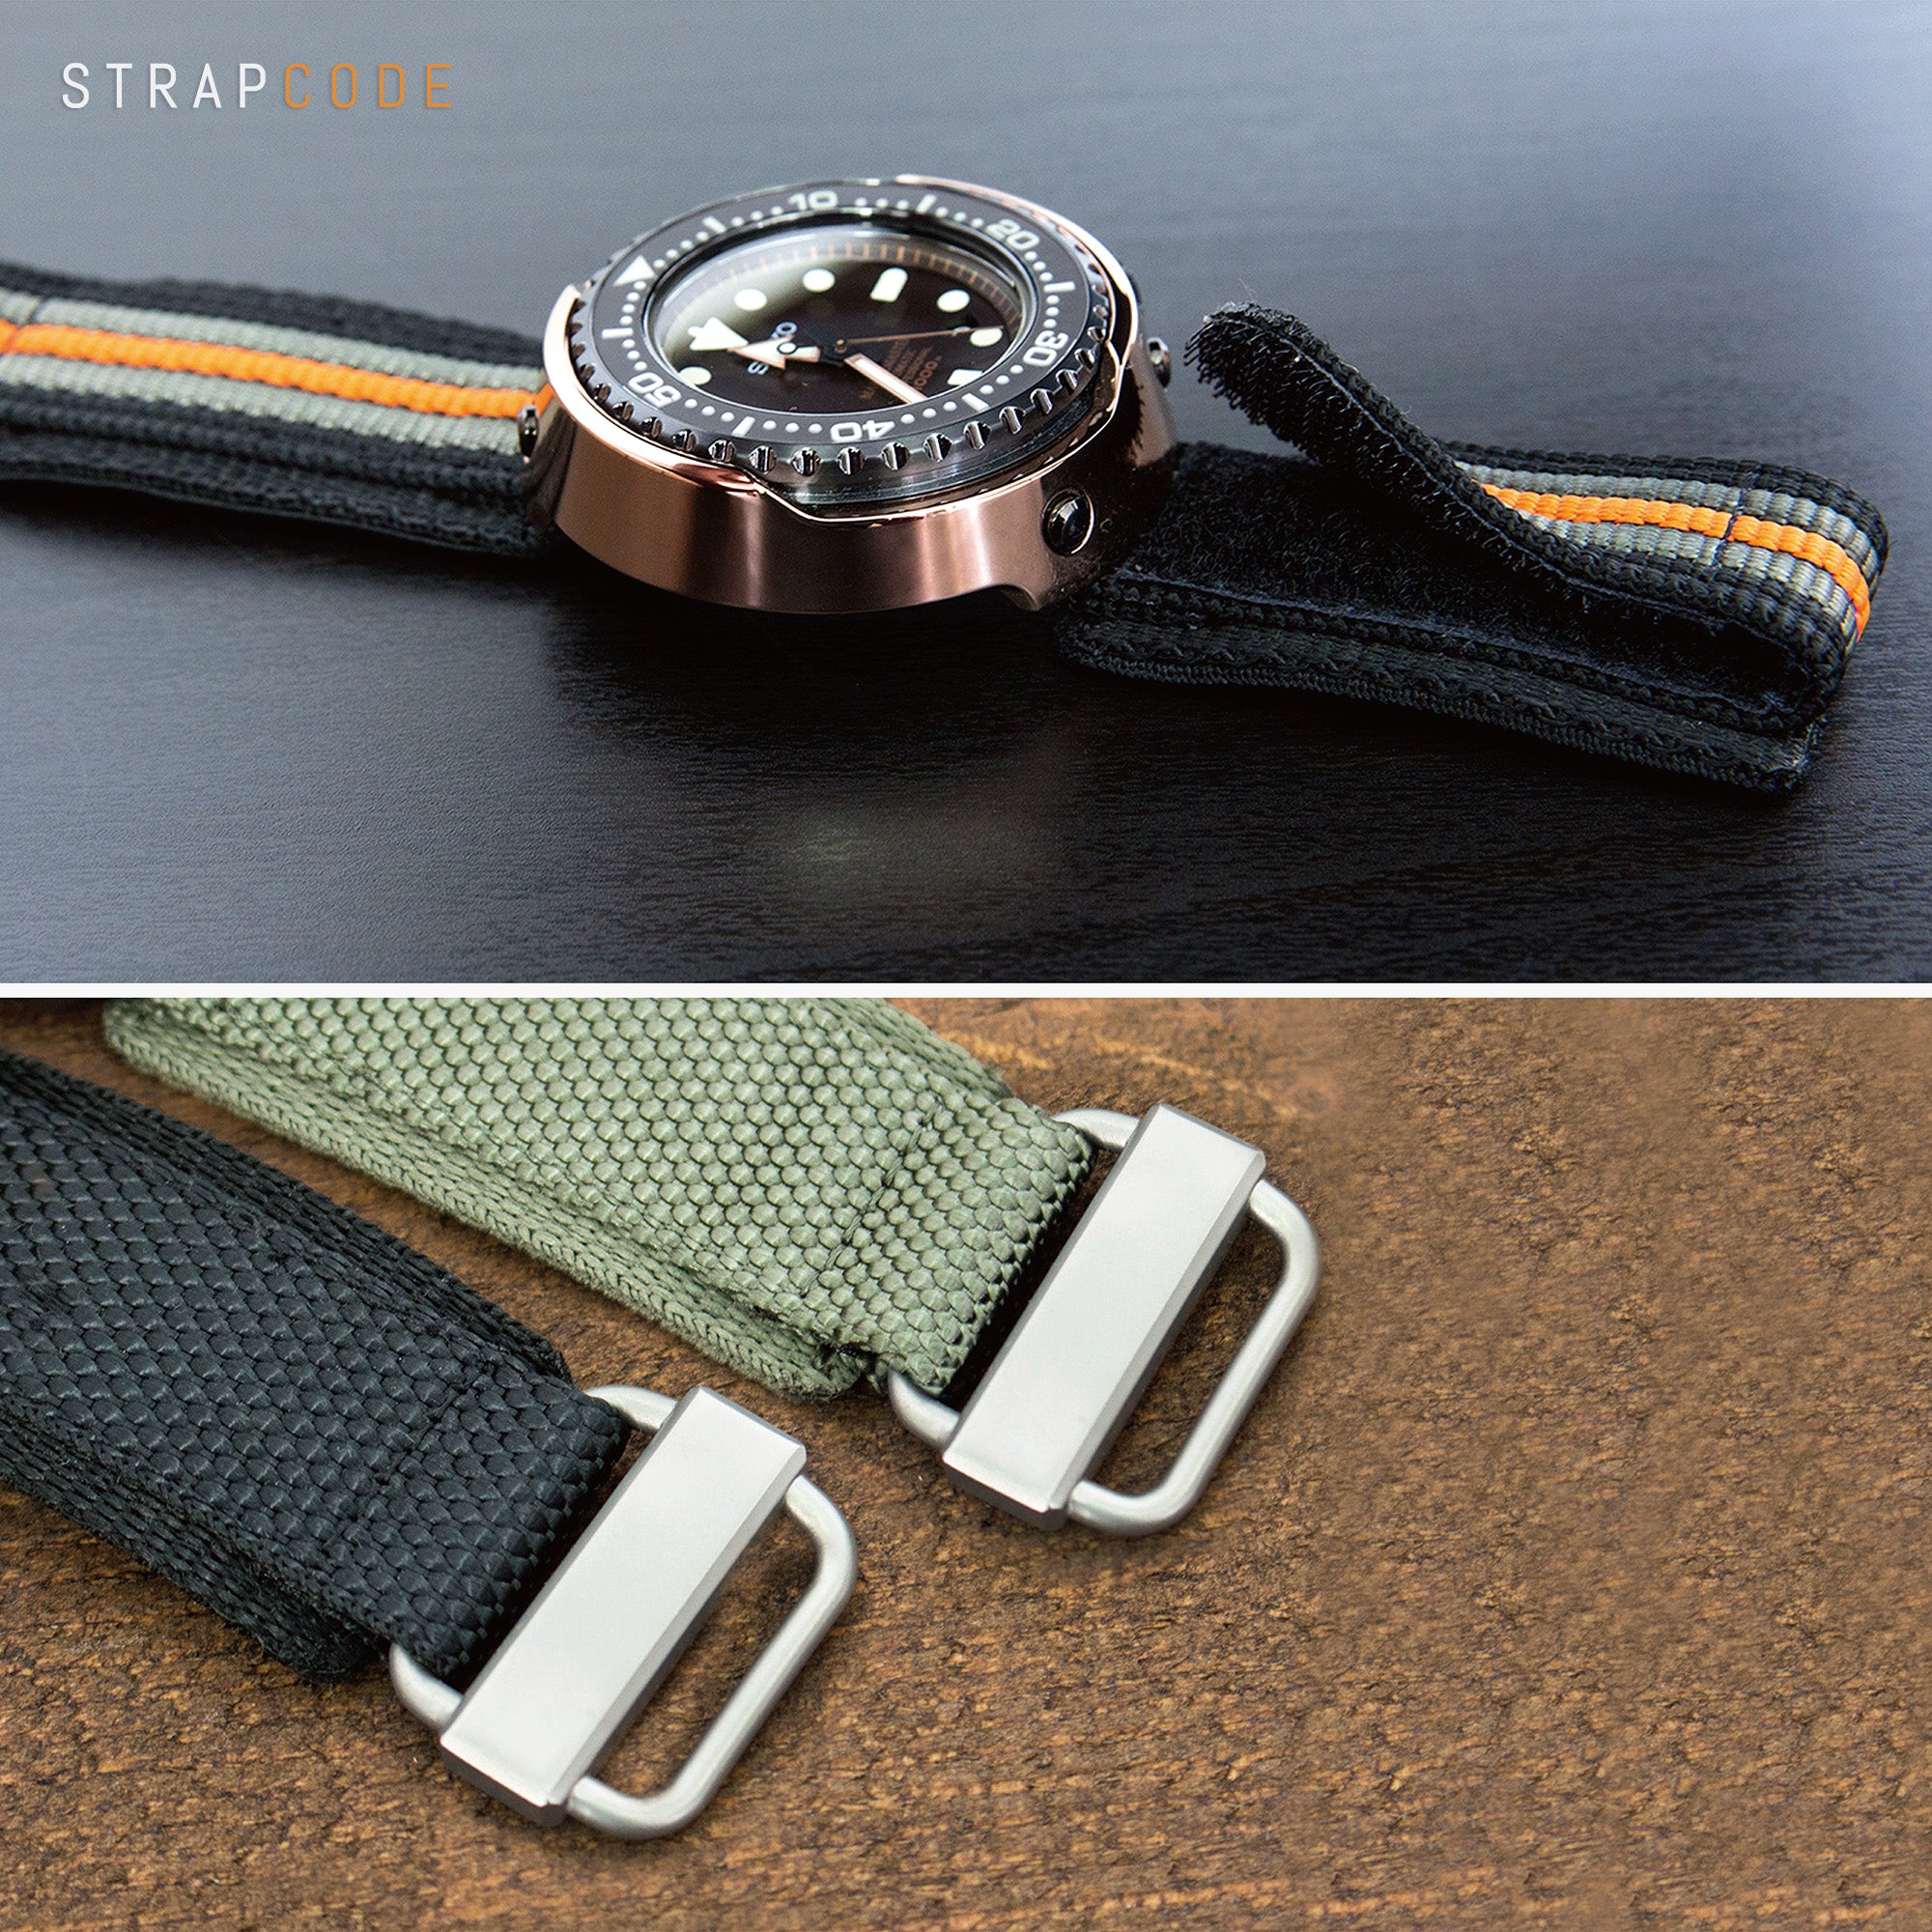 The hassle-free fastening with Hook N' Loop watch bands, by Strapcode Watch Bands